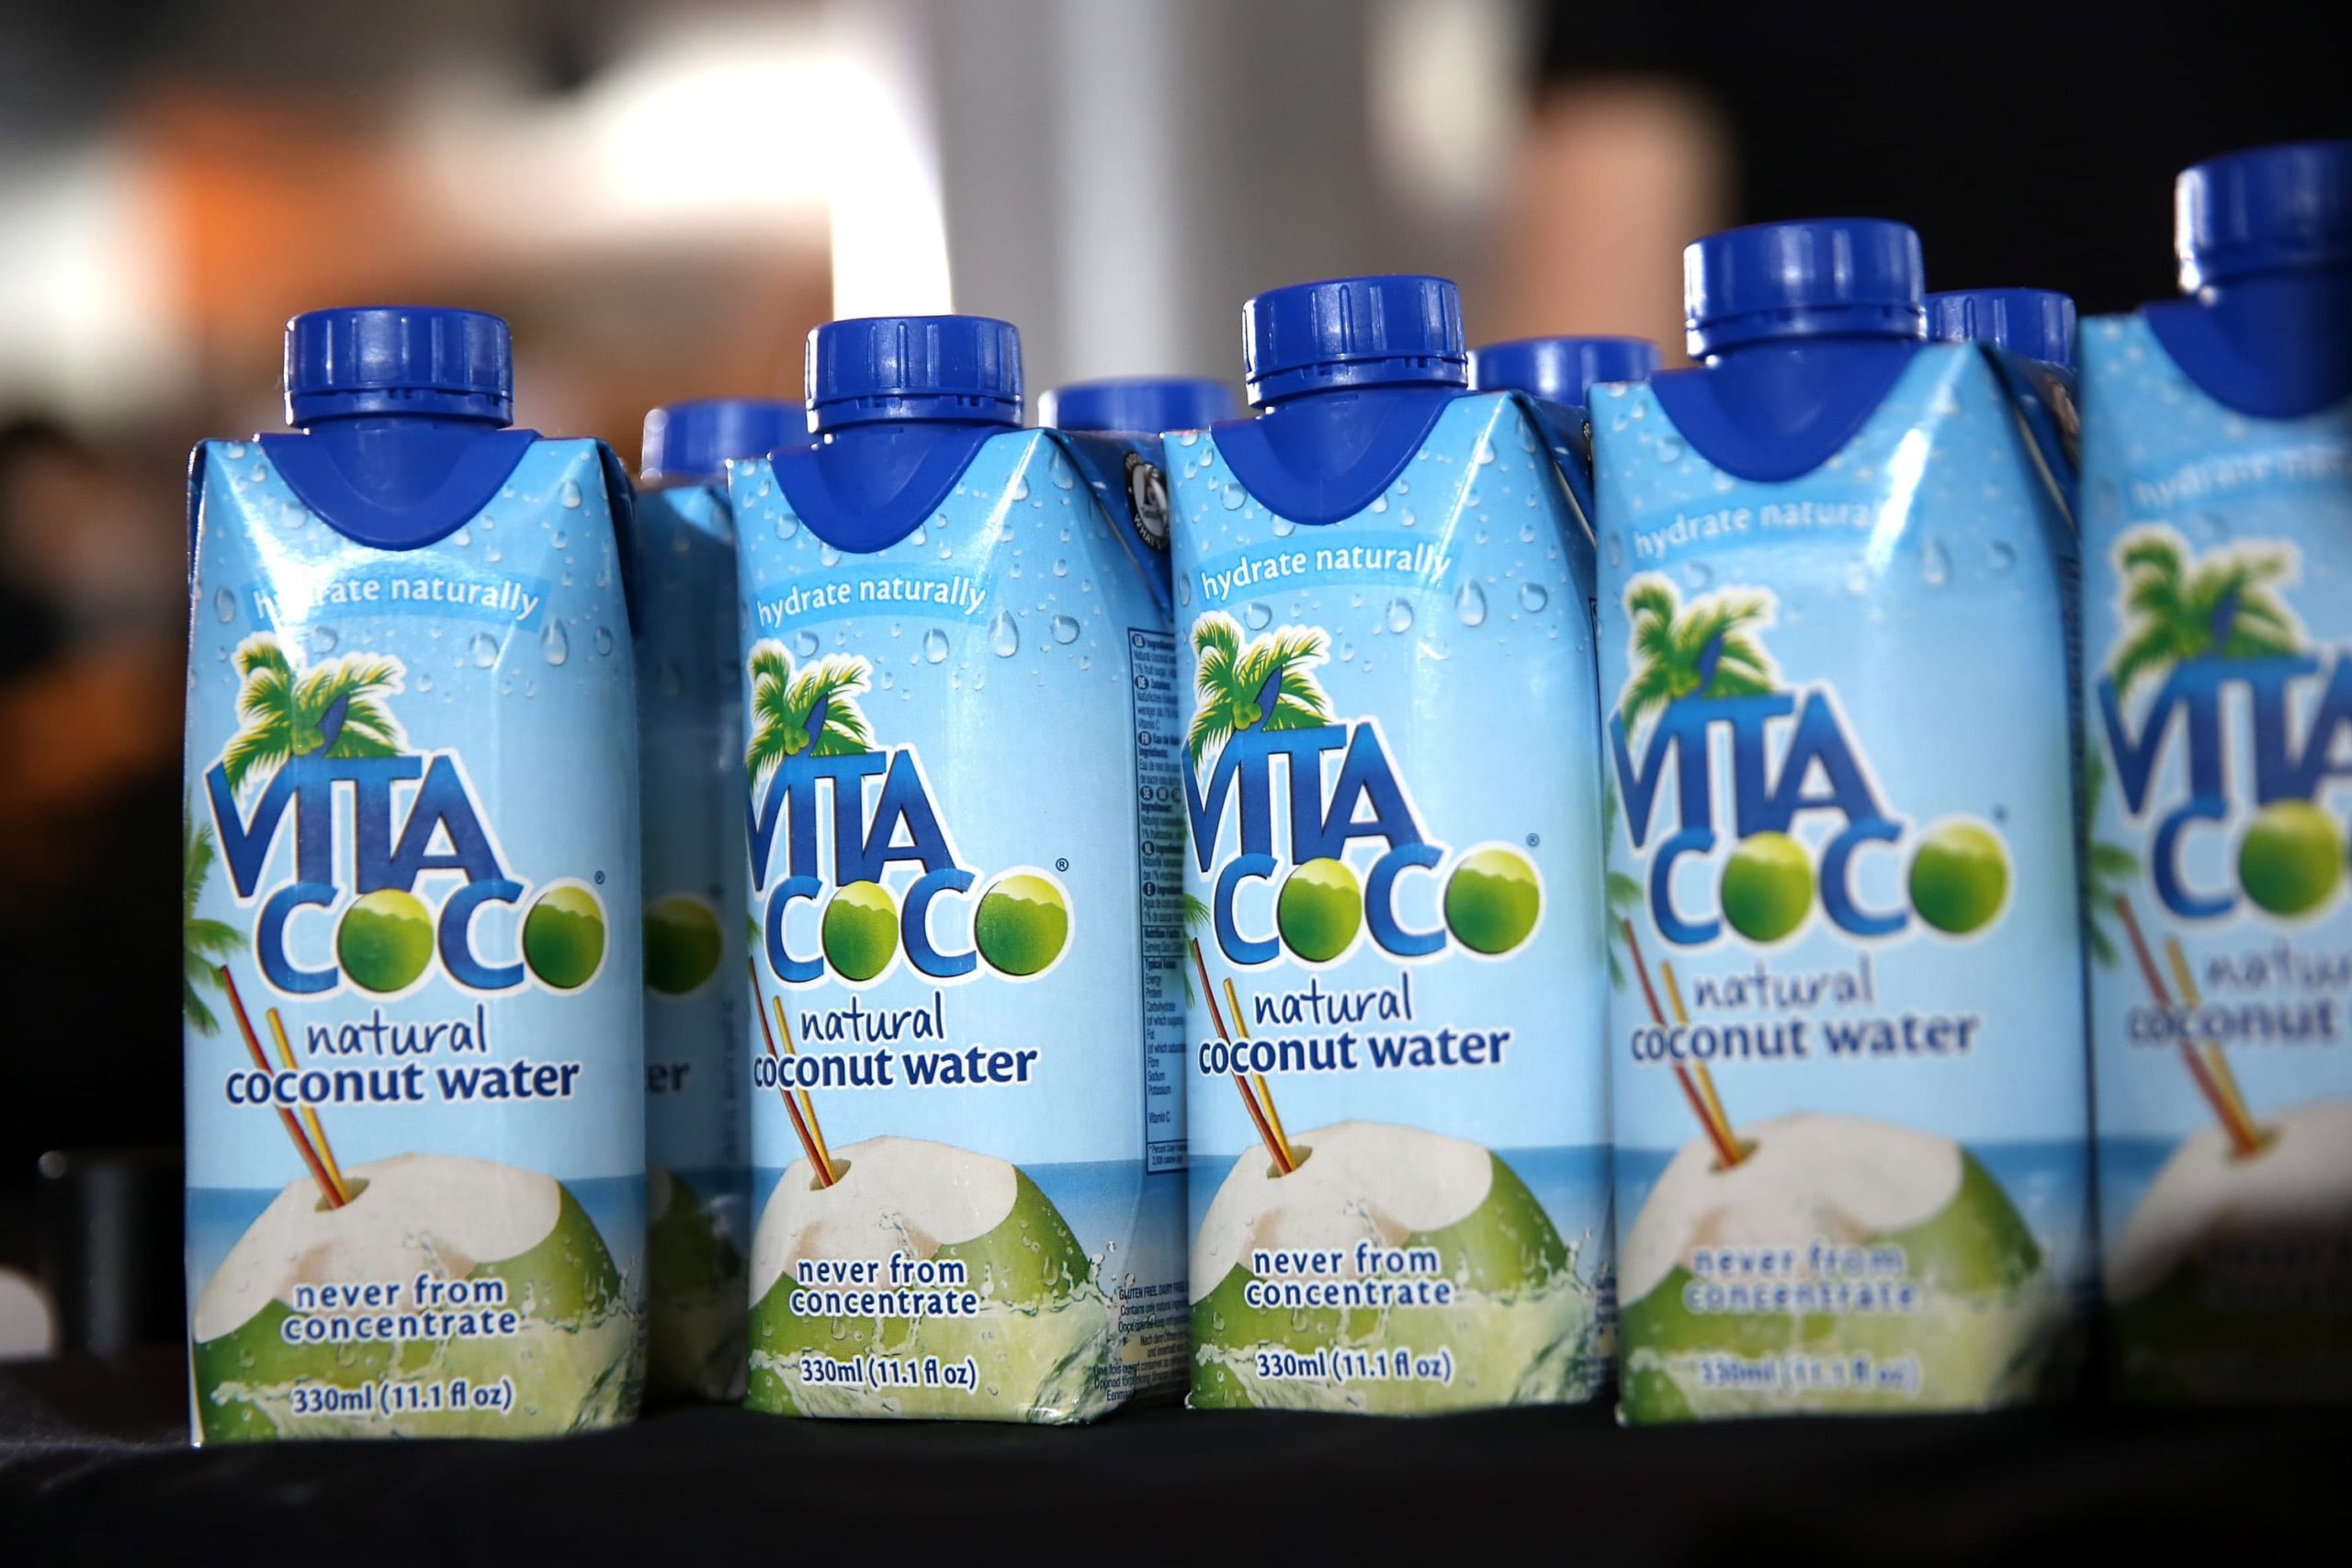 Vita Coco co-CEO says shipping costs, port delays haven’t slowed growth